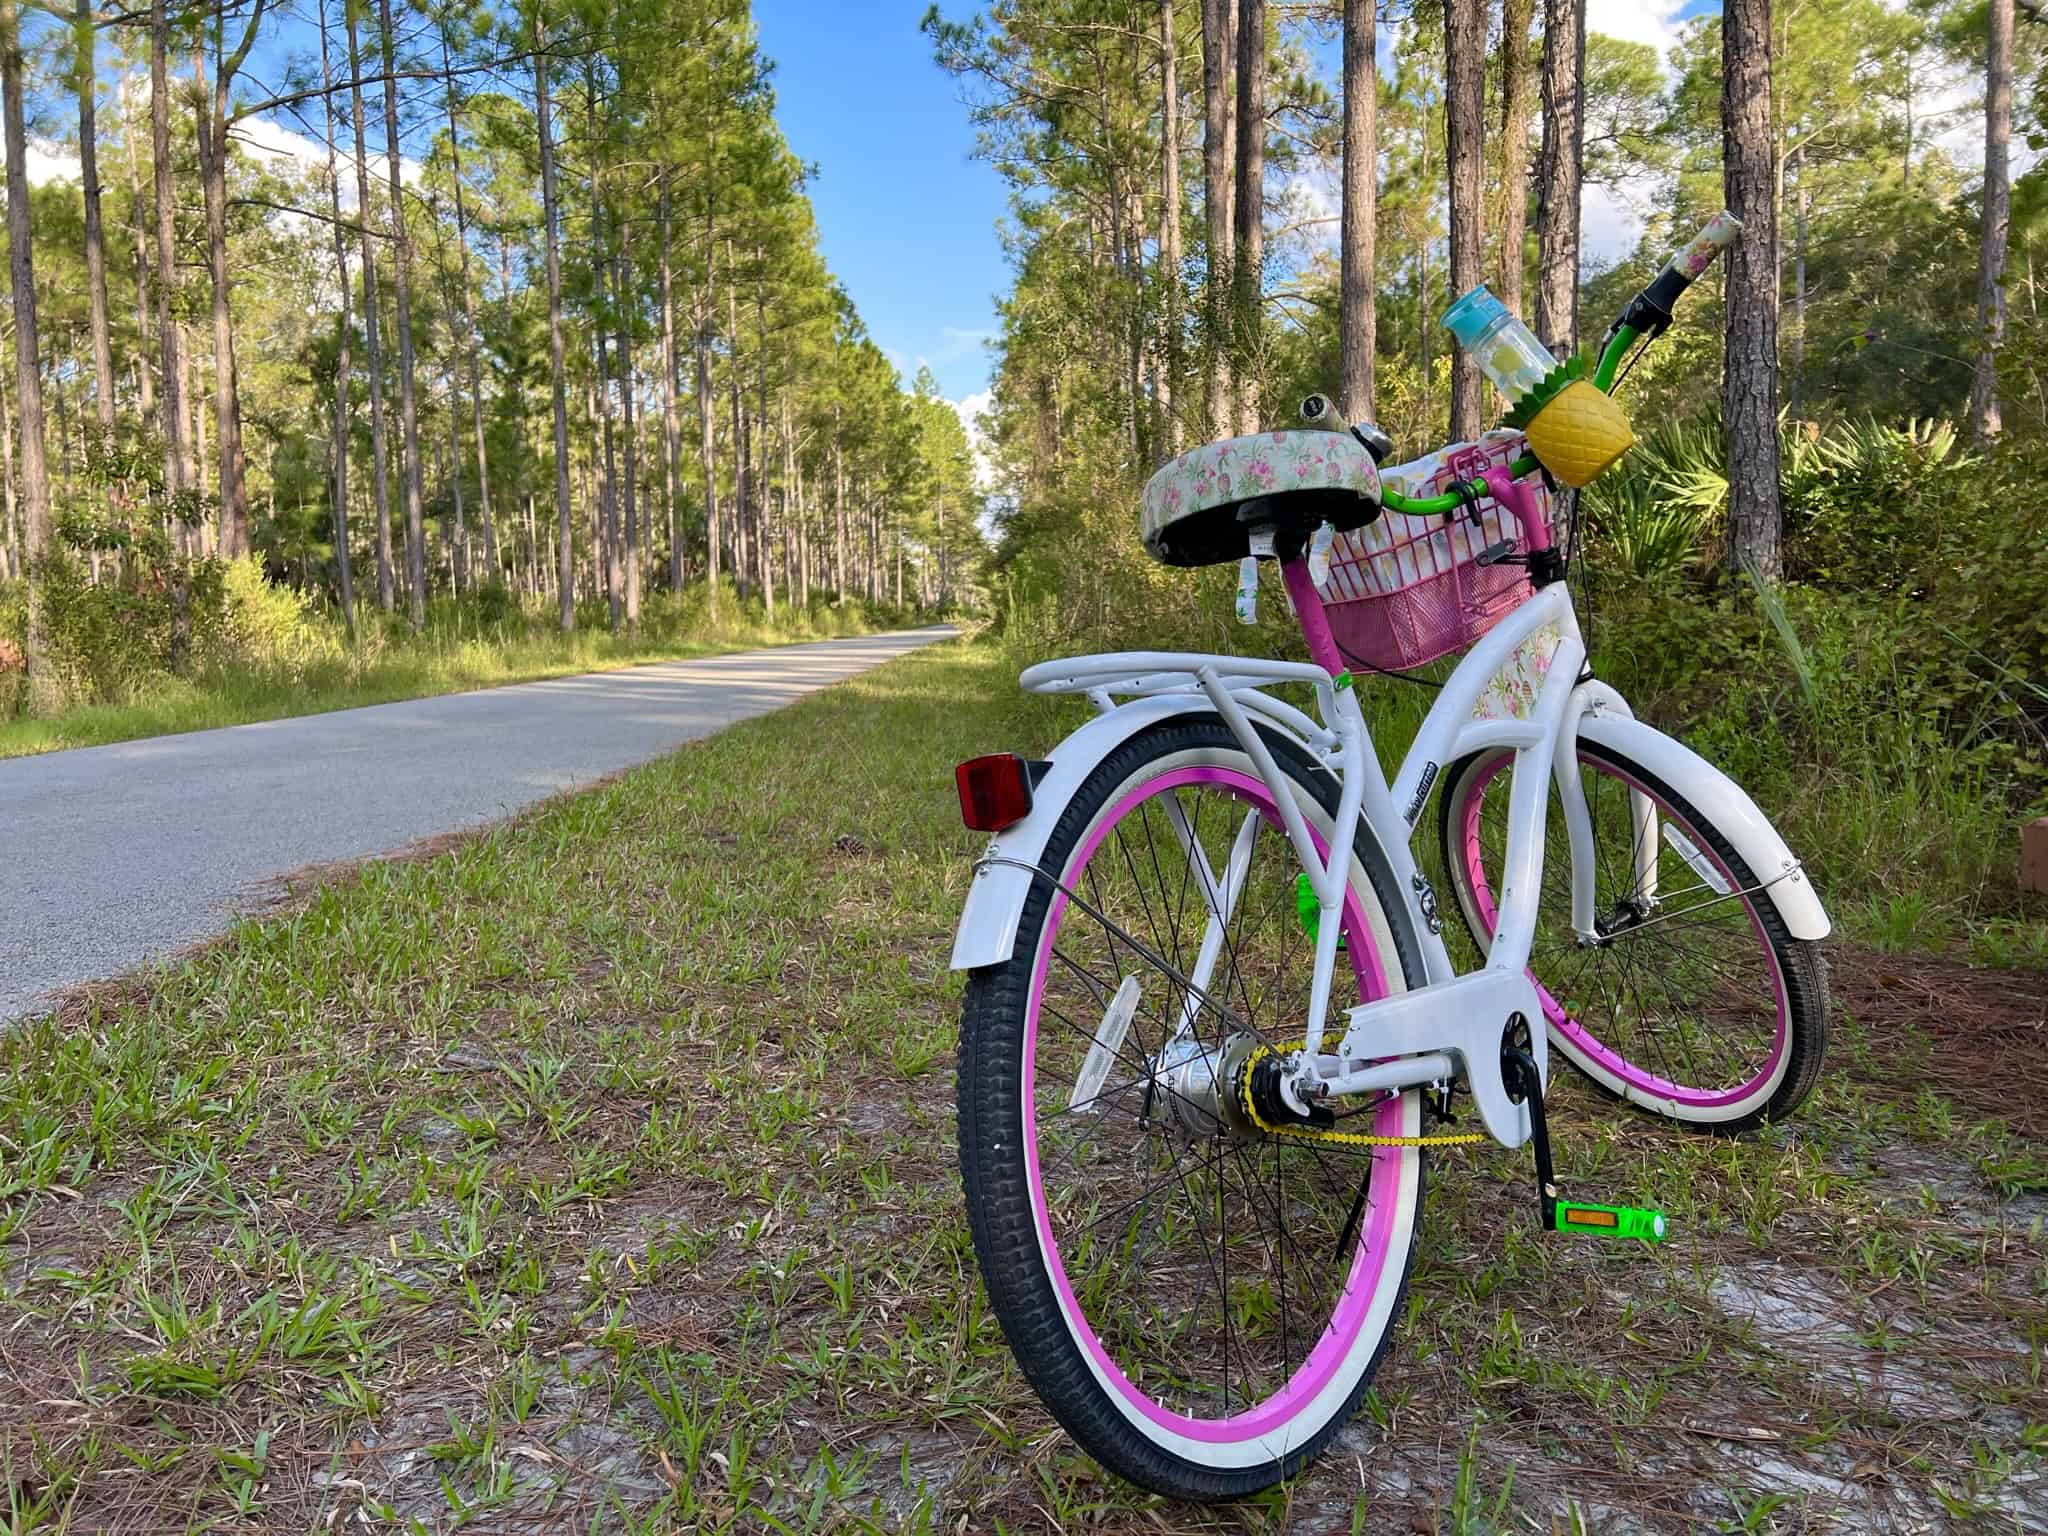 Fleurty Girl's bicycle along a recreation trail